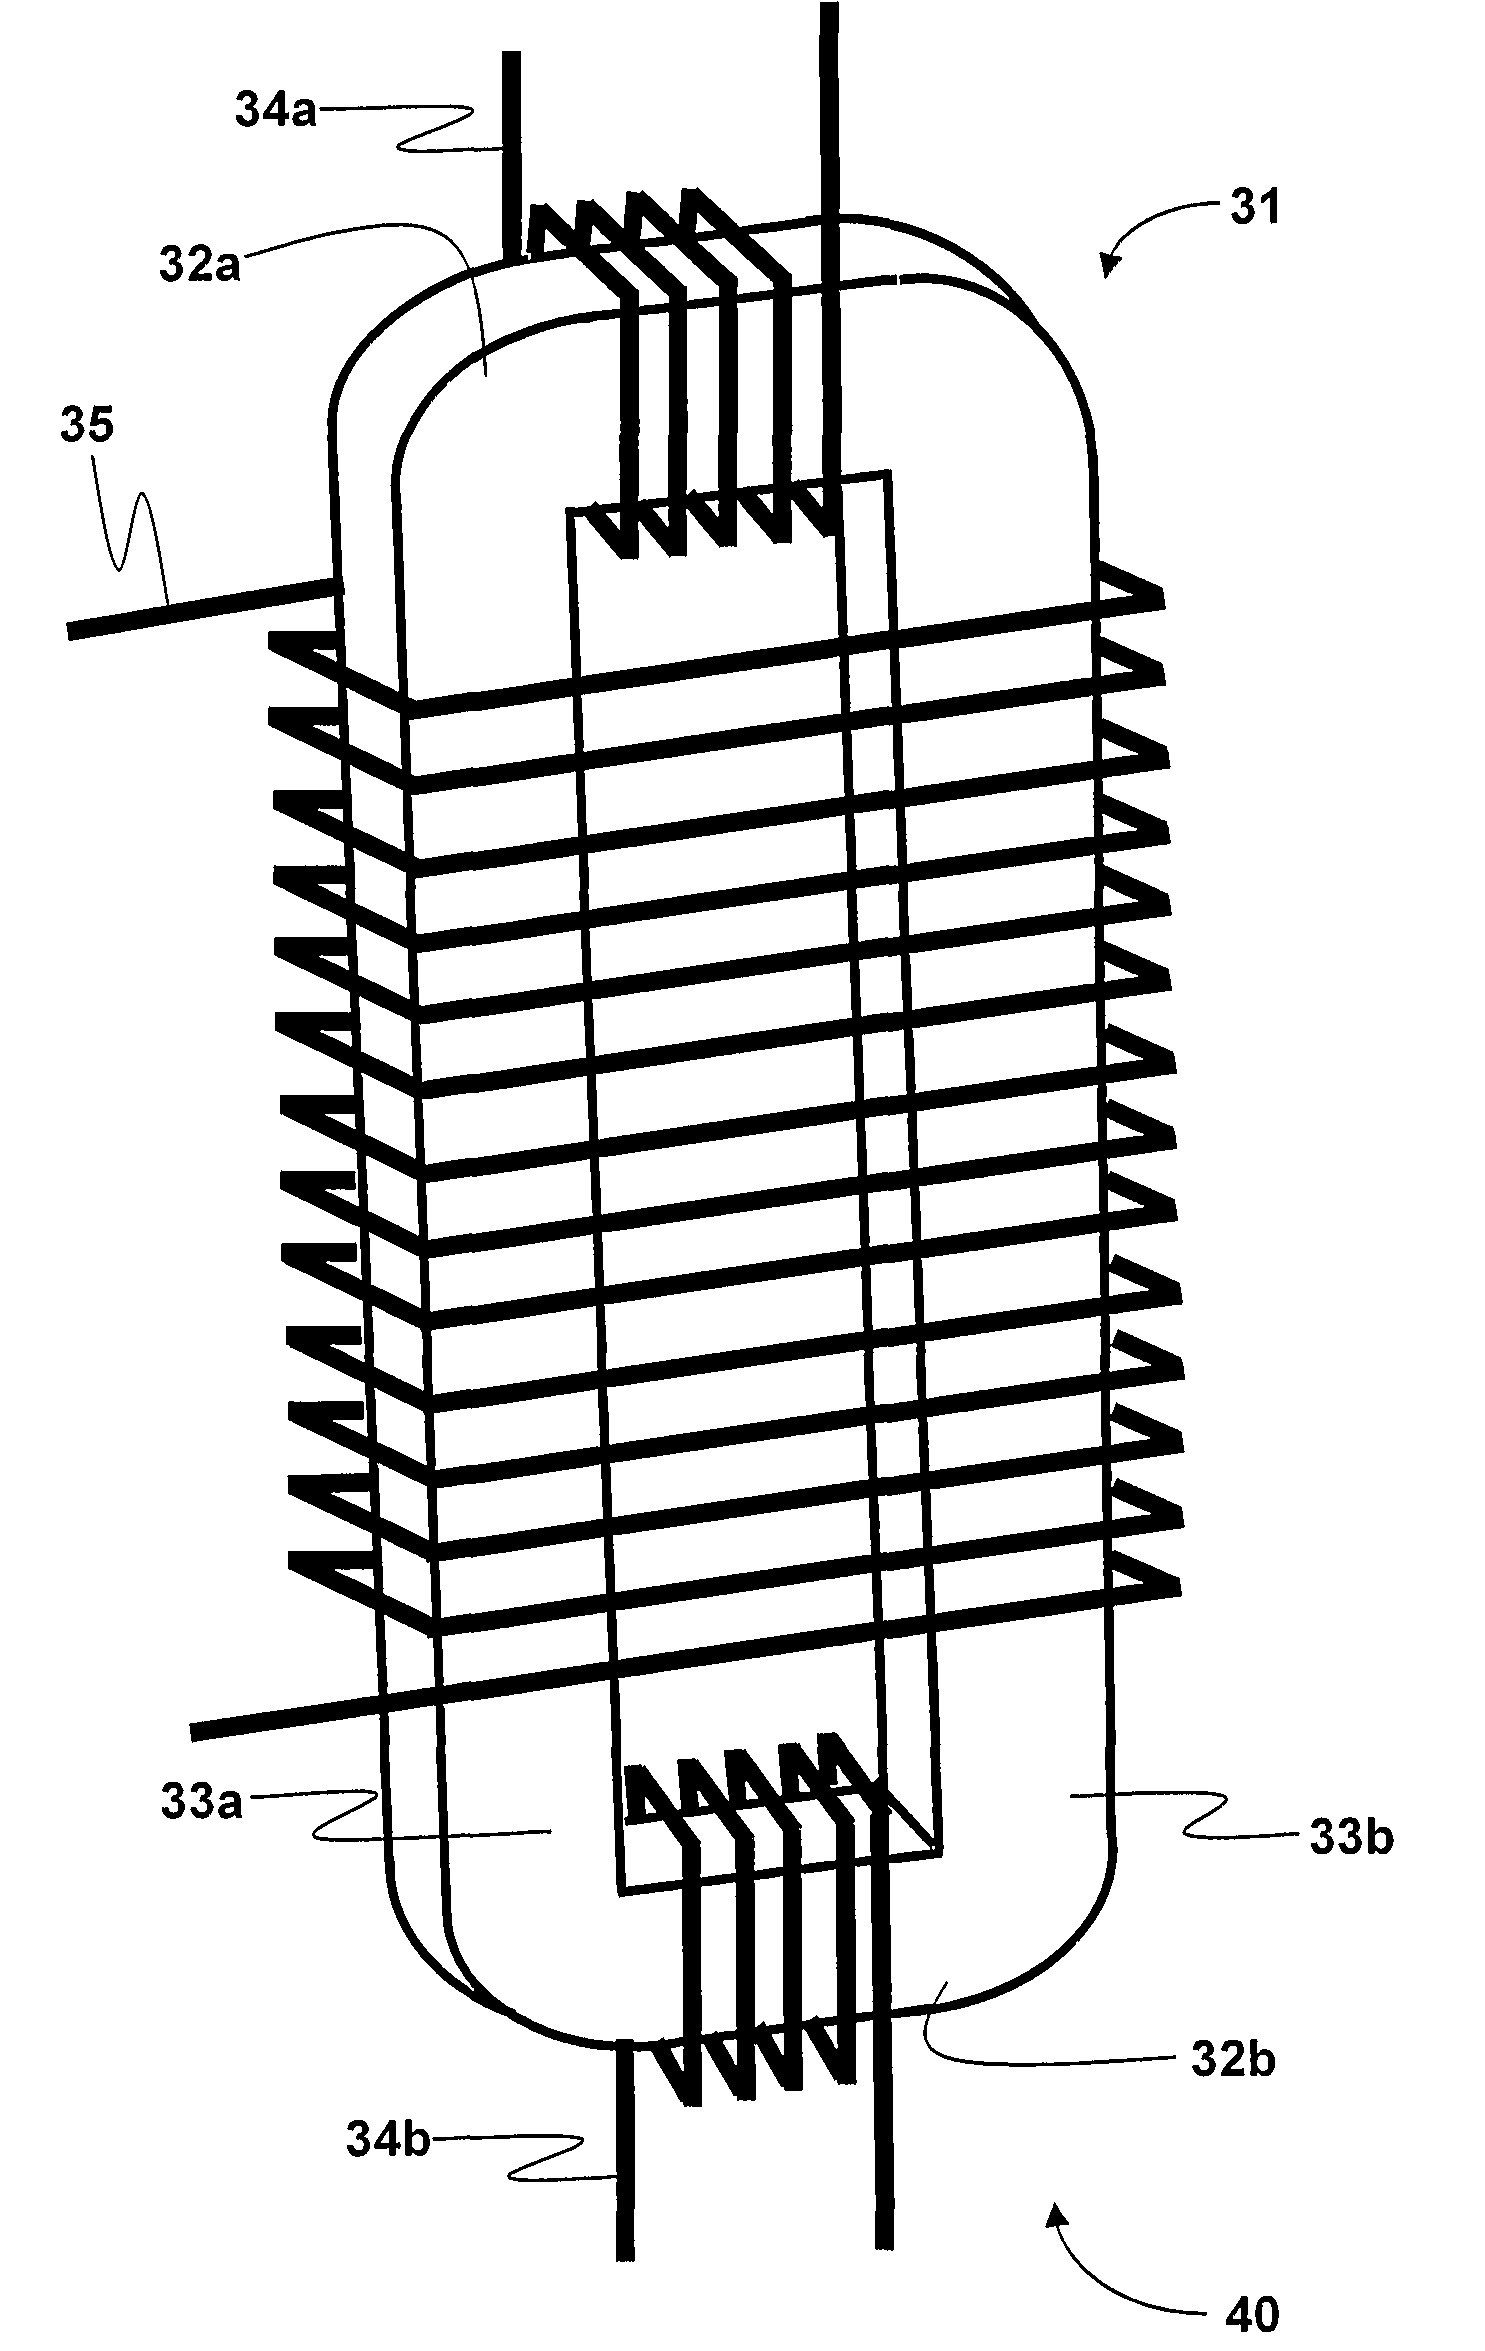 Fault current limiters (FCL) with the cores saturated by superconducting coils